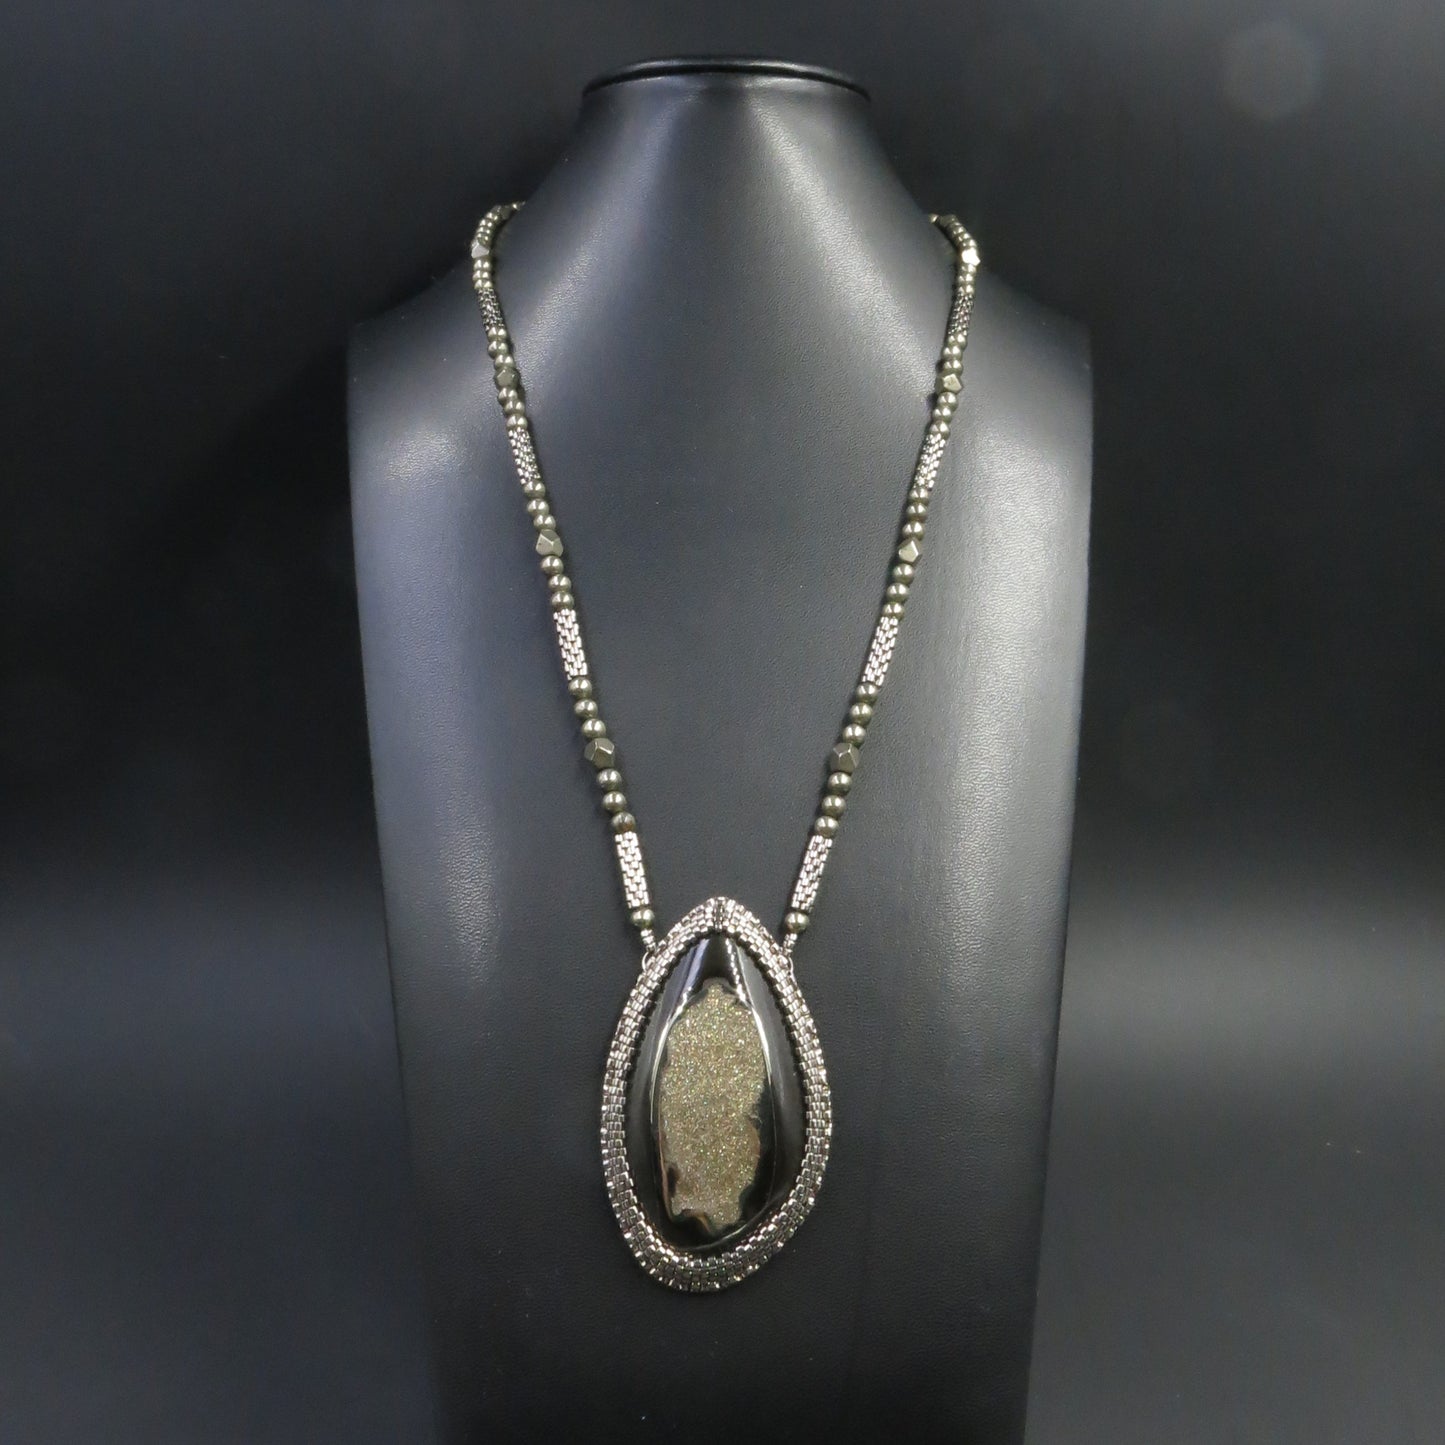 Necklace with pyritized ammonite